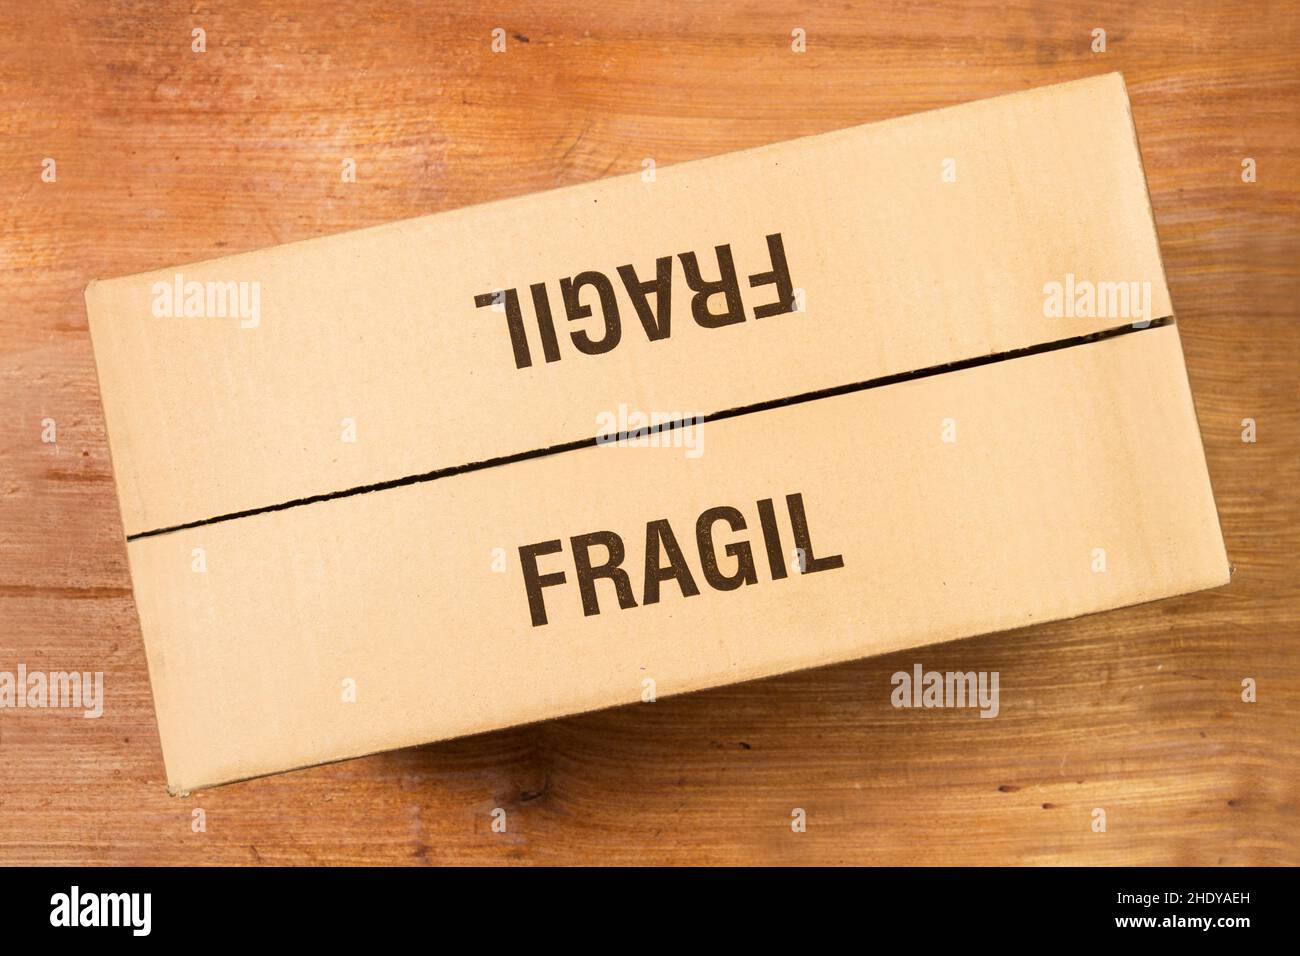 A cardboard box on a wooden background in a top view (fragile) Stock Photo